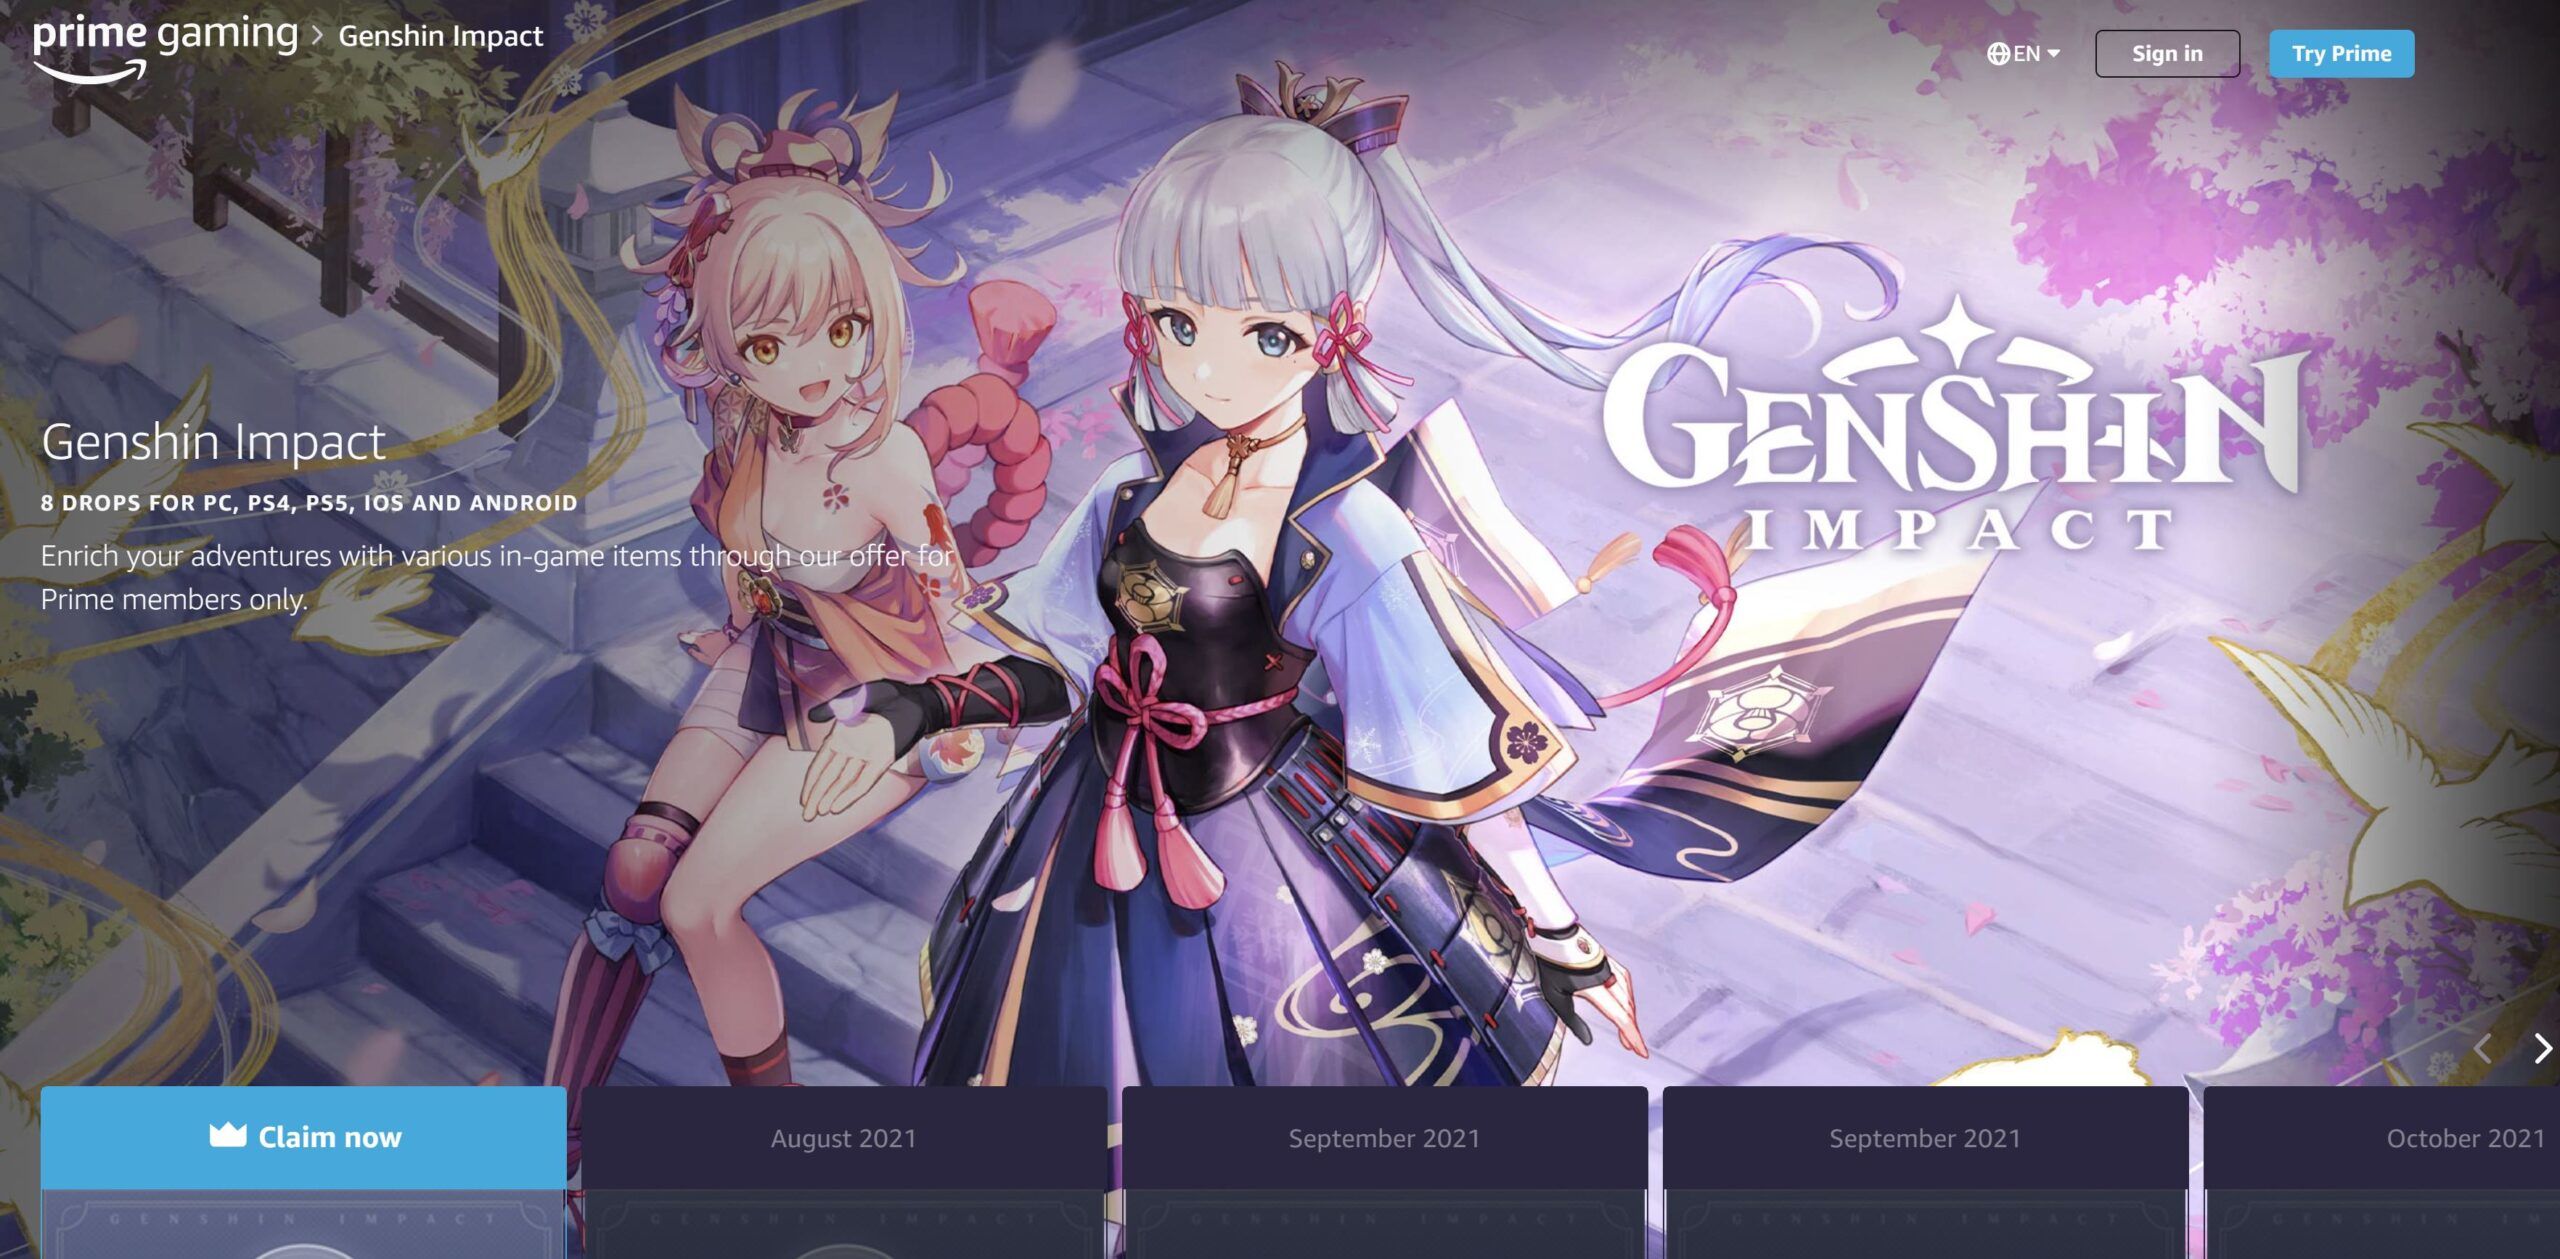 Genshin Impact Redeem Code List (December 2021): Free Primogems, Hero's  Wit, and More with New Redeem Codes